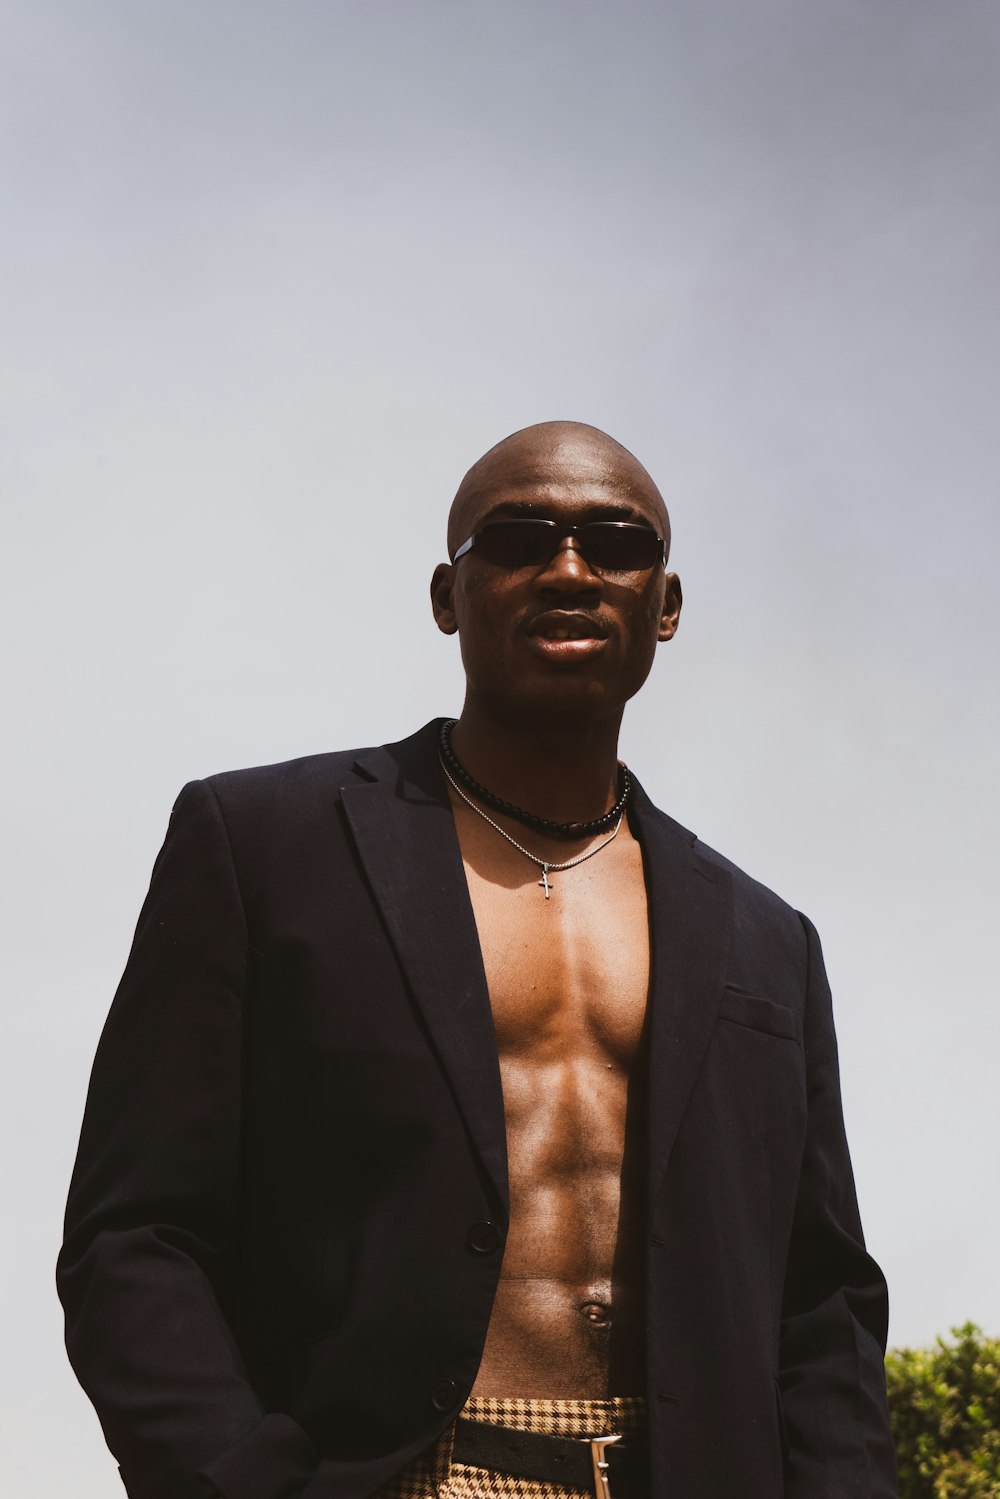 a man with no shirt wearing a jacket and sunglasses